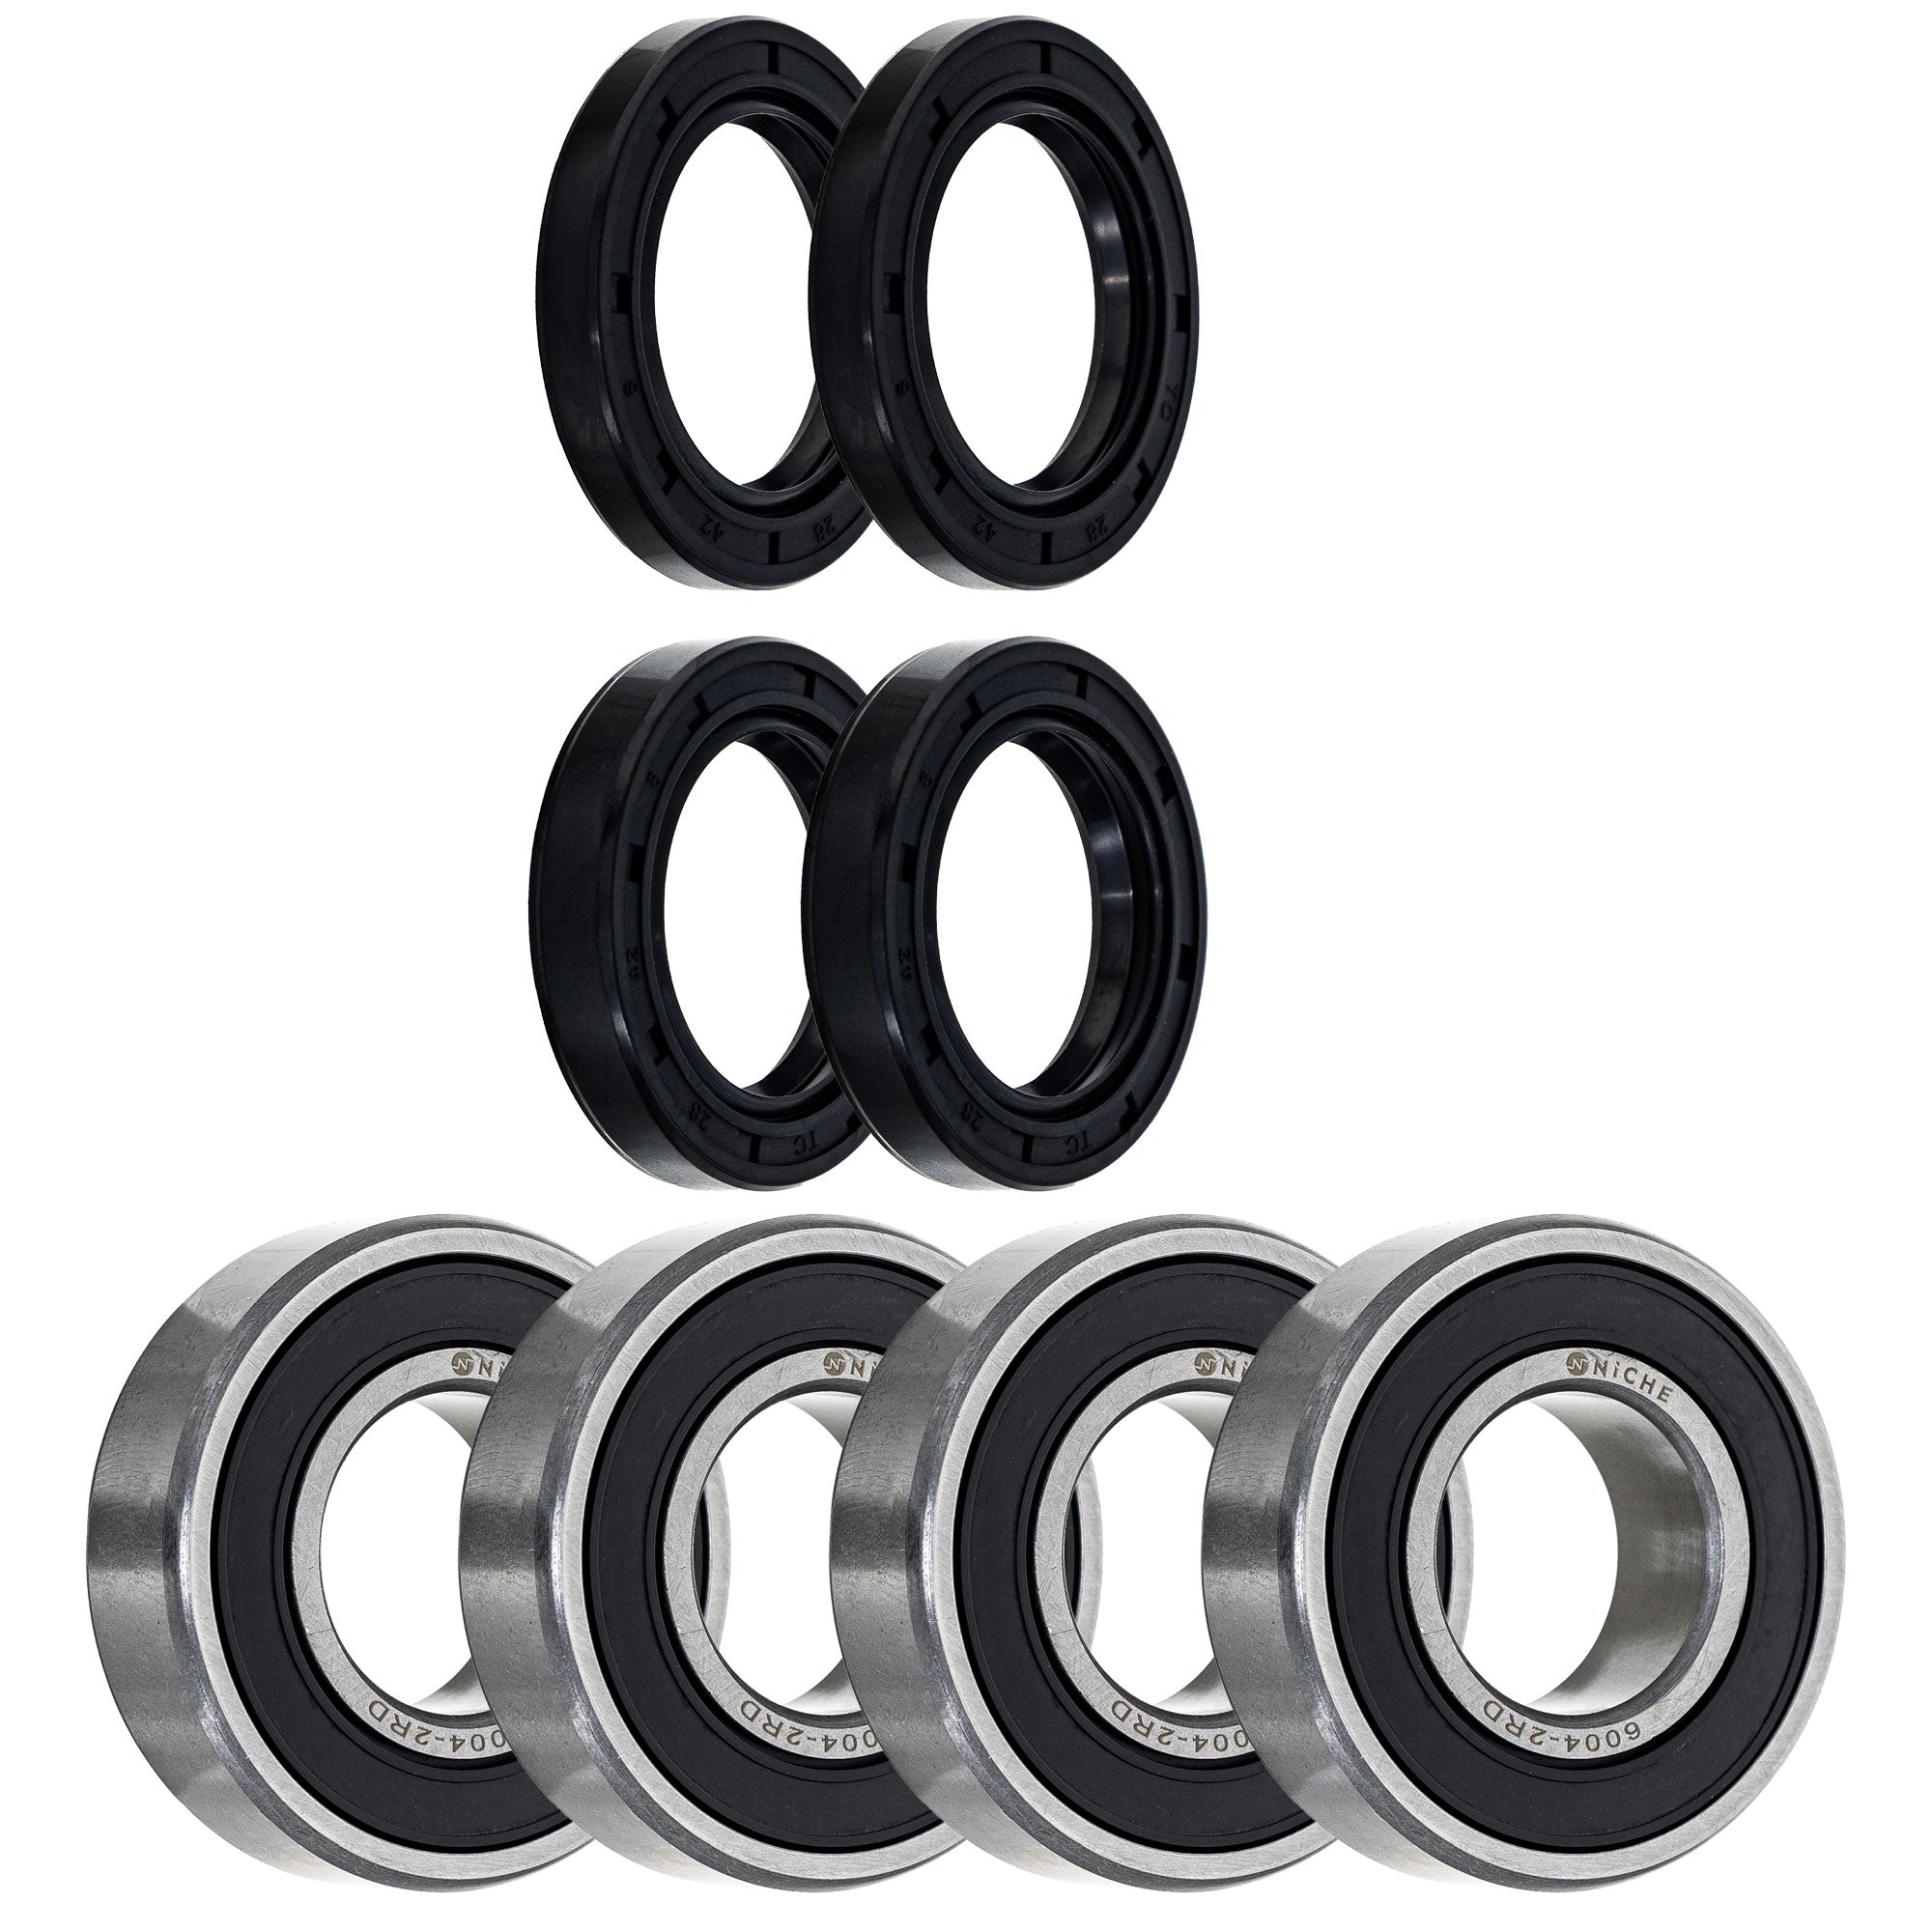 Wheel Bearing Seal Kit for zOTHER TRX200 FourTrax NICHE MK1008253